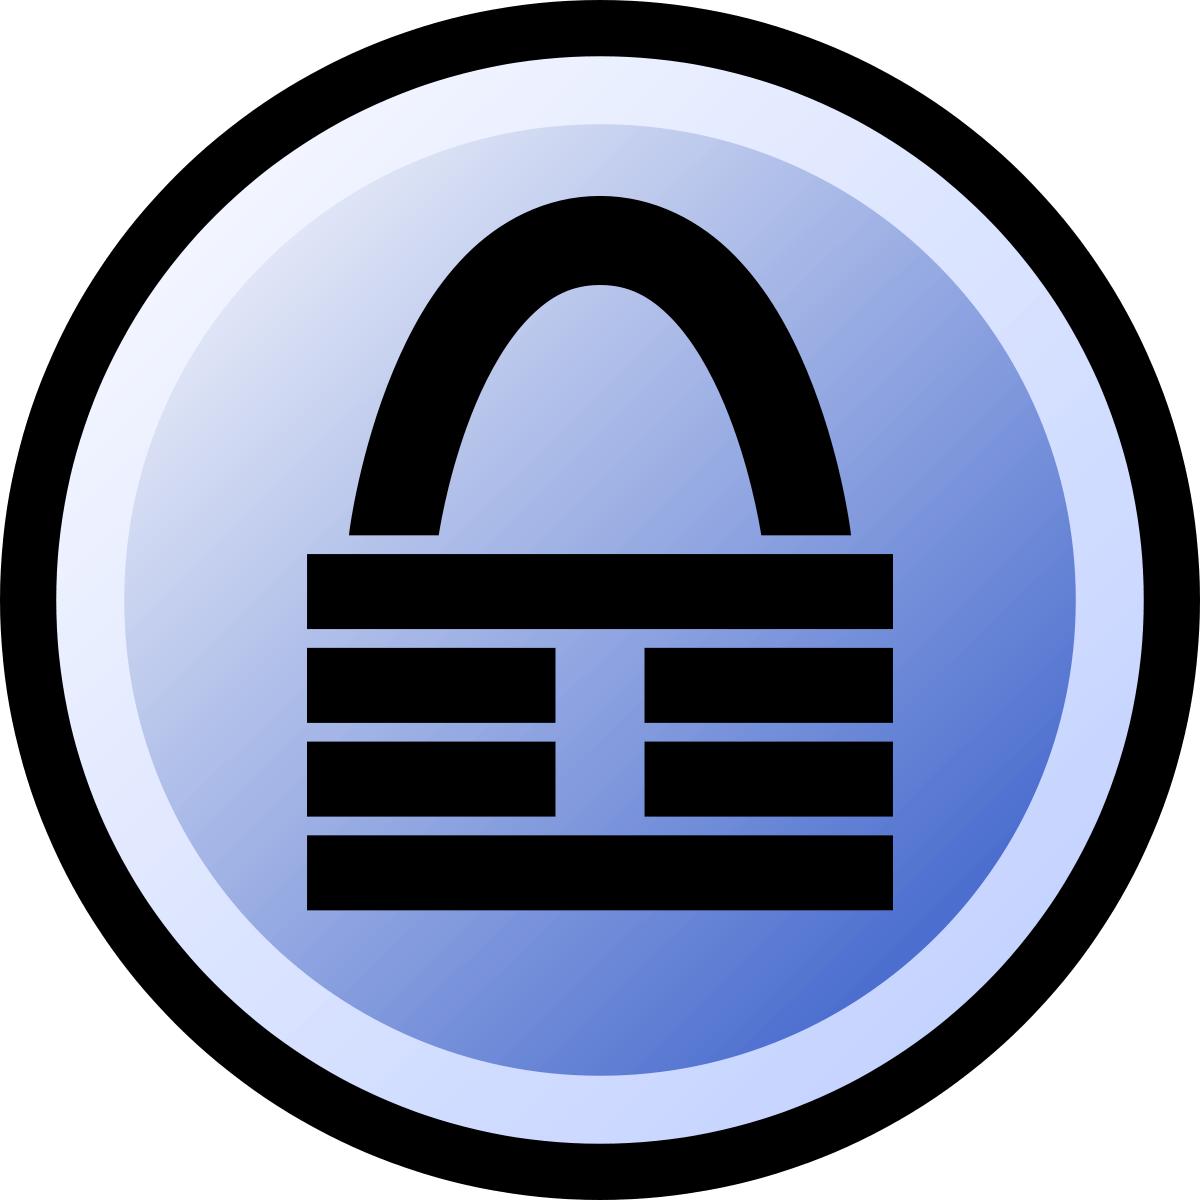 //www.howtogeek.com/wp-content/uploads/2021/05/1200px-KeePass_icon.svg_.png